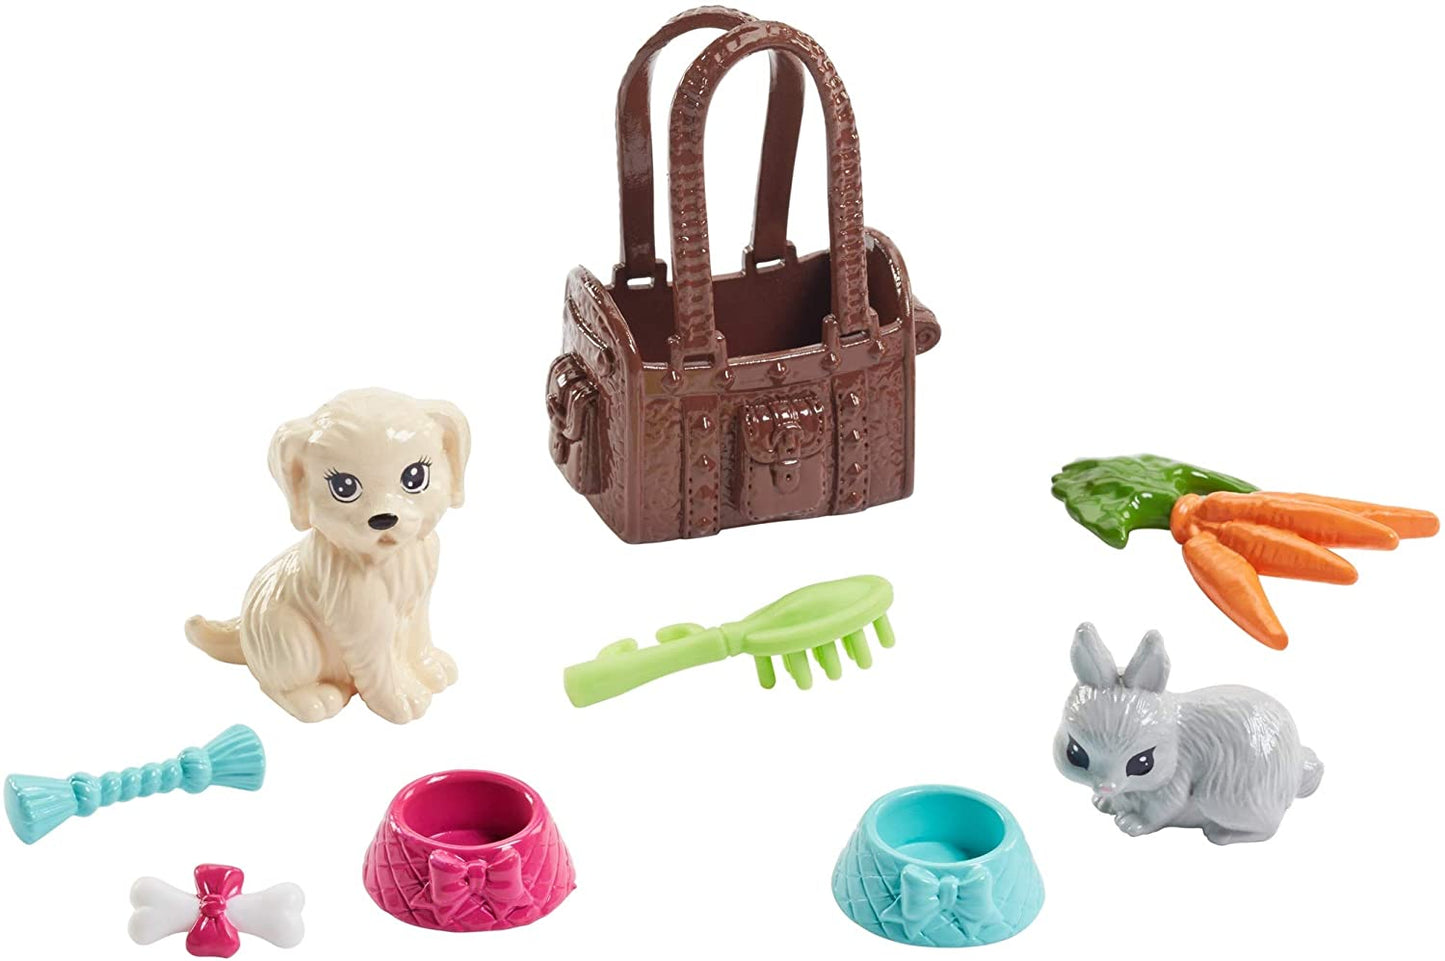 Barbie - Picnic doll Playset with animals and accessories, 3 years toy (Mattel FPR48)